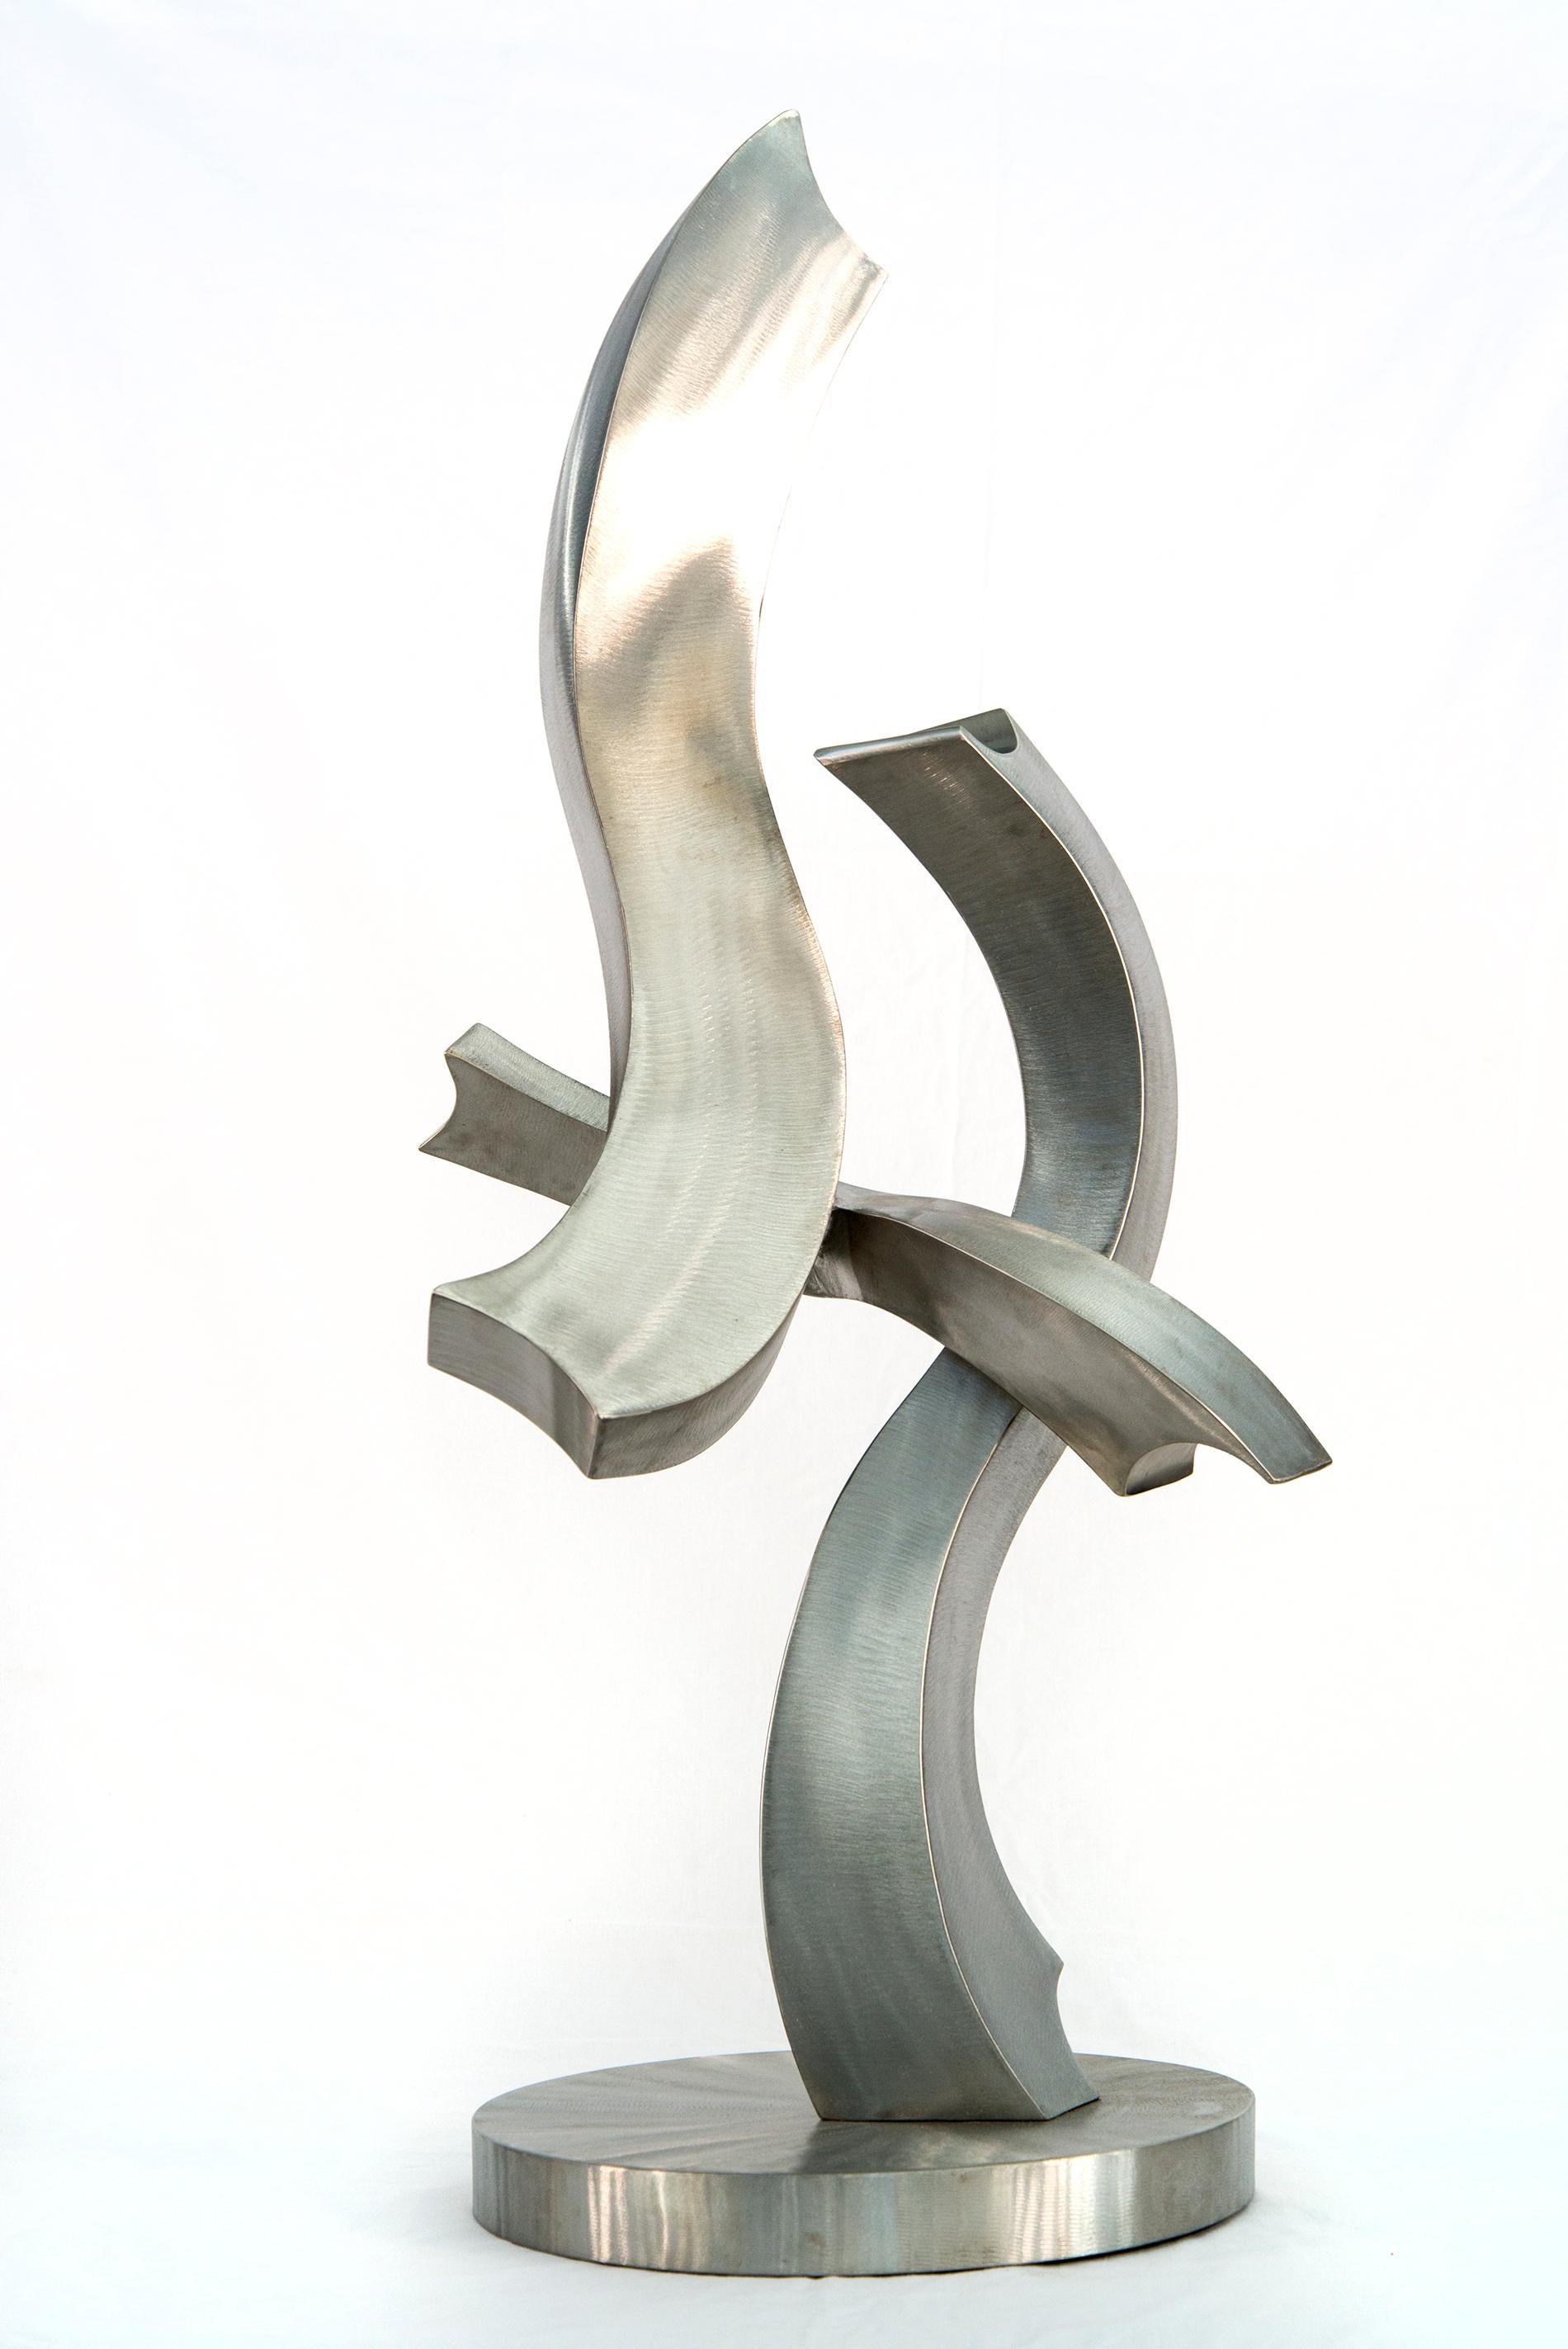 Kevin Robb Abstract Sculpture - A Glimpse of Fun - contemporary, abstract, forged stainless steel sculpture